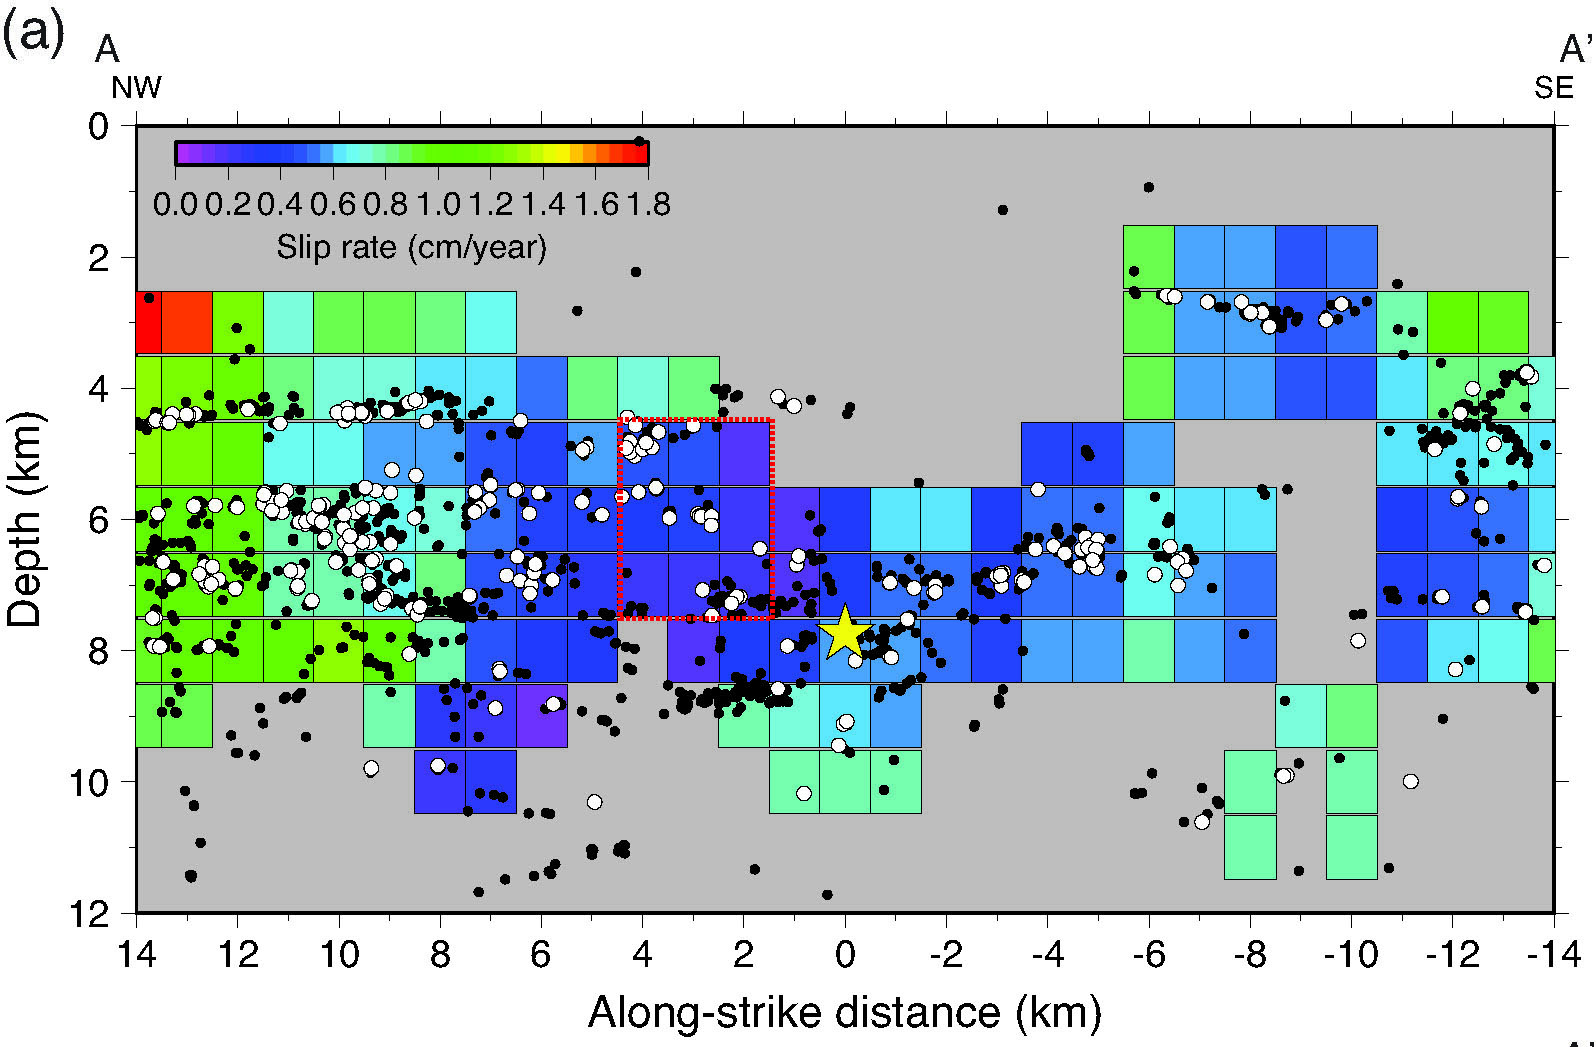 Spatial variation in slip rate during 1984-1998 inferred from characteristically repeating microearthquakes. The 1989 Loma Prieta earthquake led to a long-term acceleration of fault slip. The yellow star is the 1998 Mw 5.1 SJB earthquake.